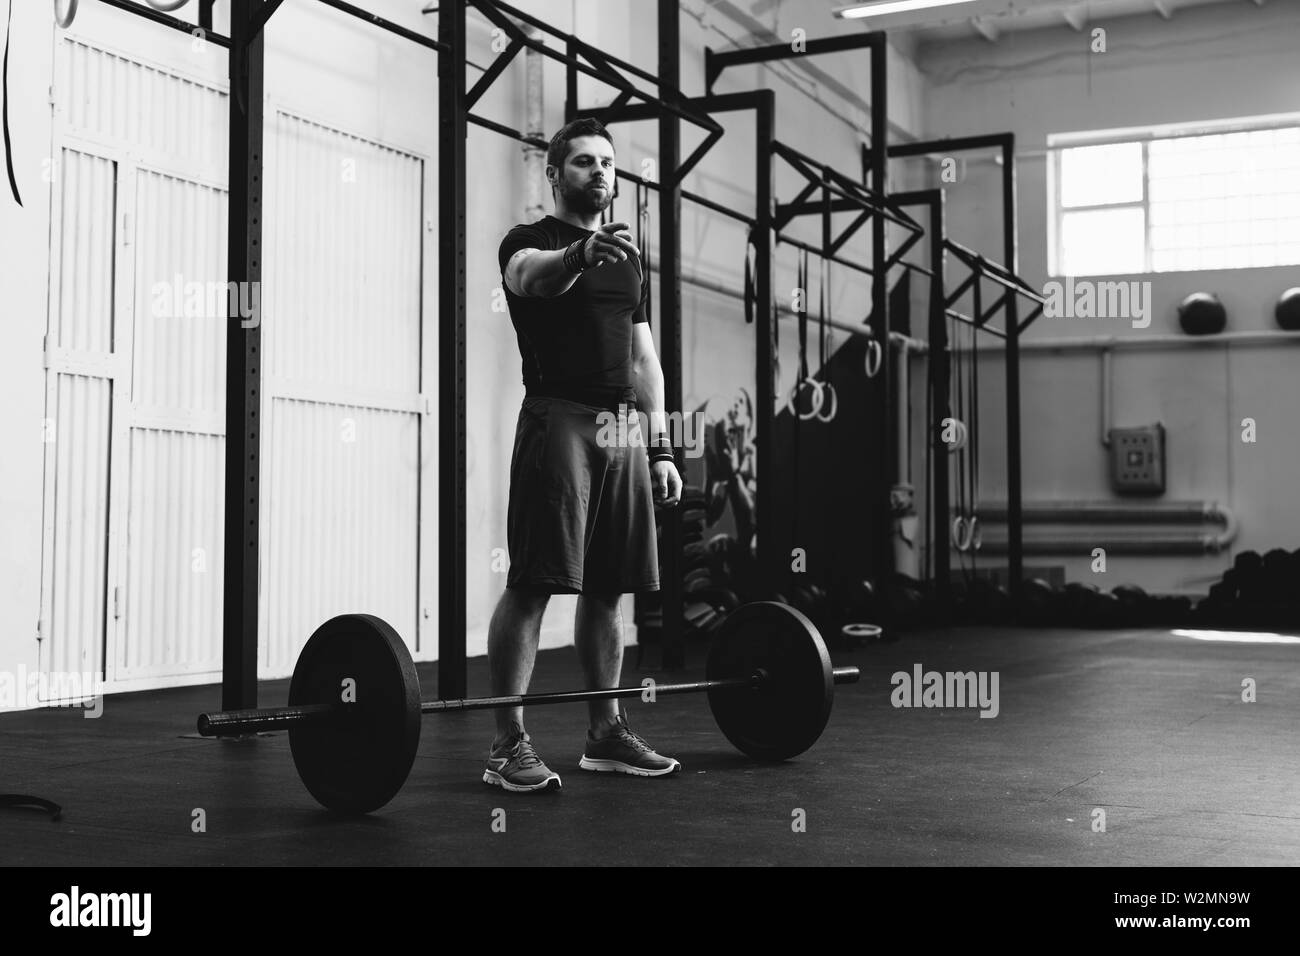 Handsome athlete pointing and looking away while between weightlifting sessions Stock Photo